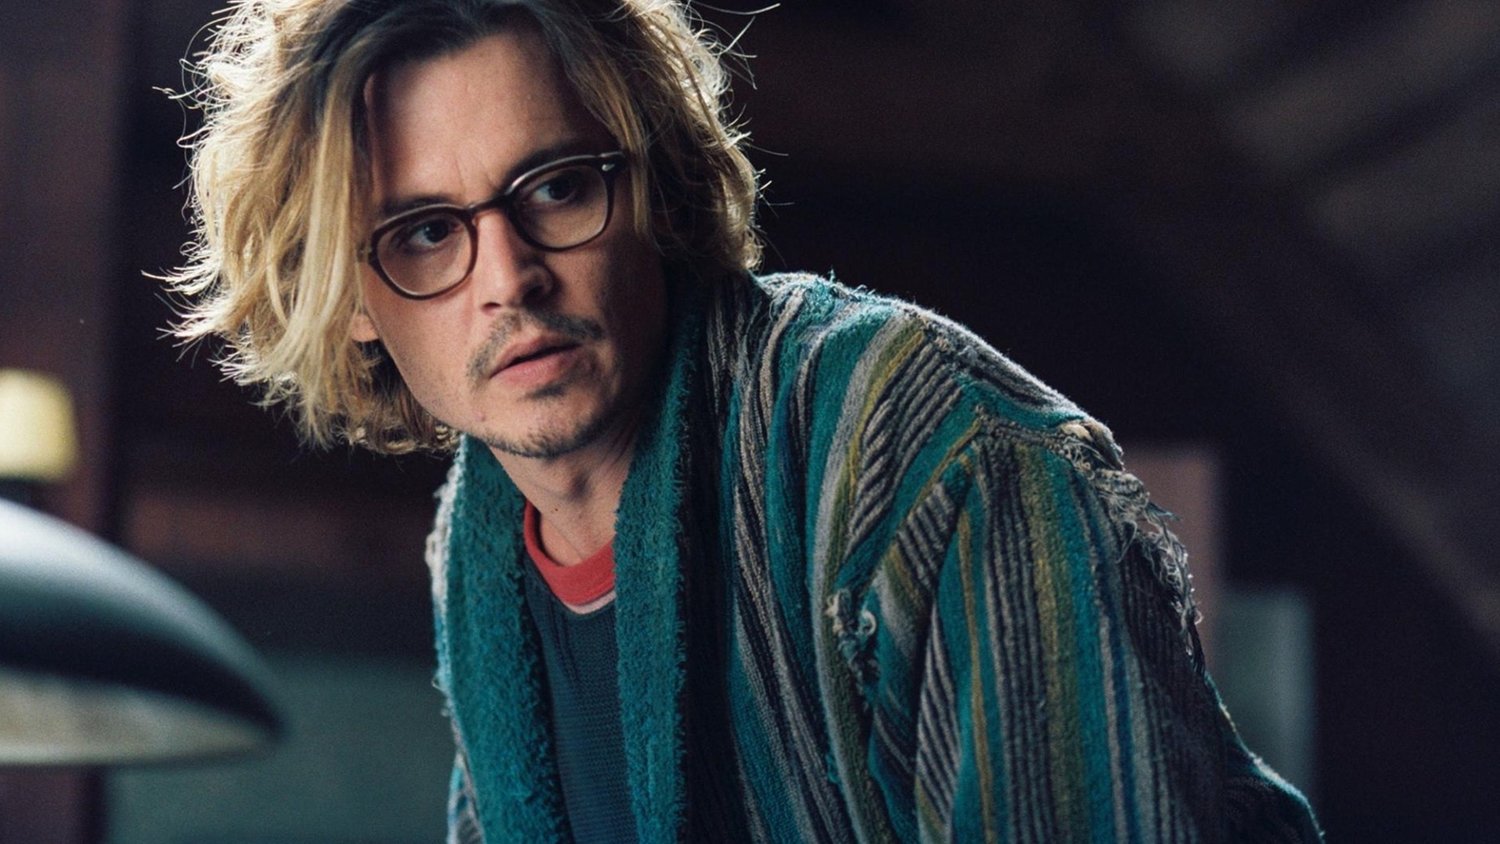 Which director has Johnny Depp collaborated with multiple times?